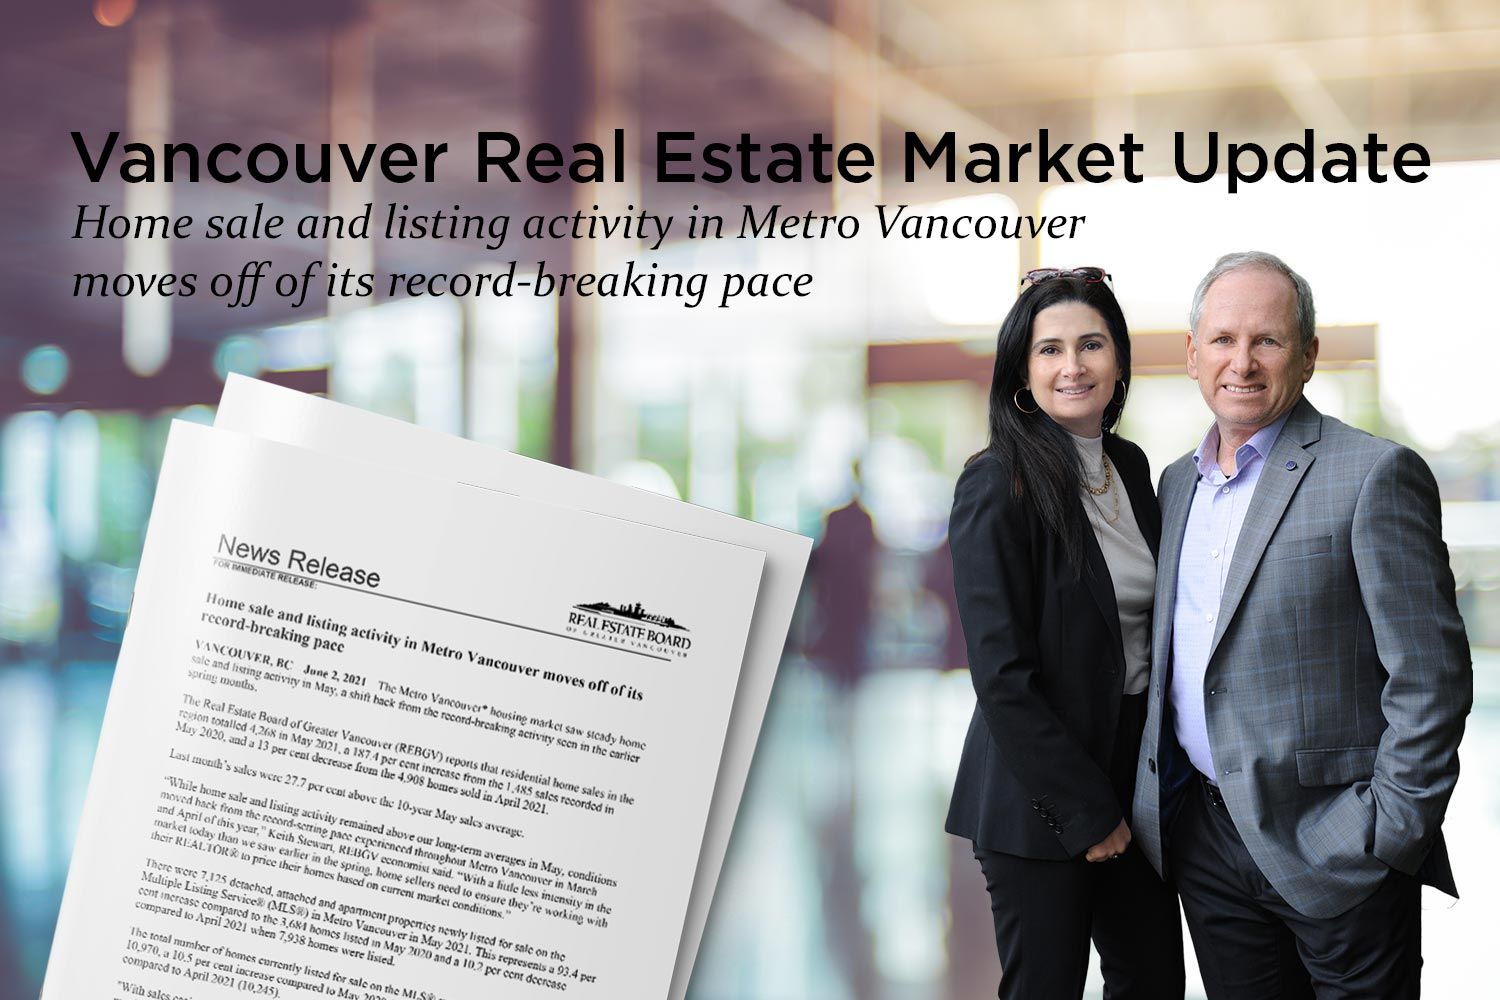 Home sale and listing activity in Metro Vancouver moves off of its record-breaking pace